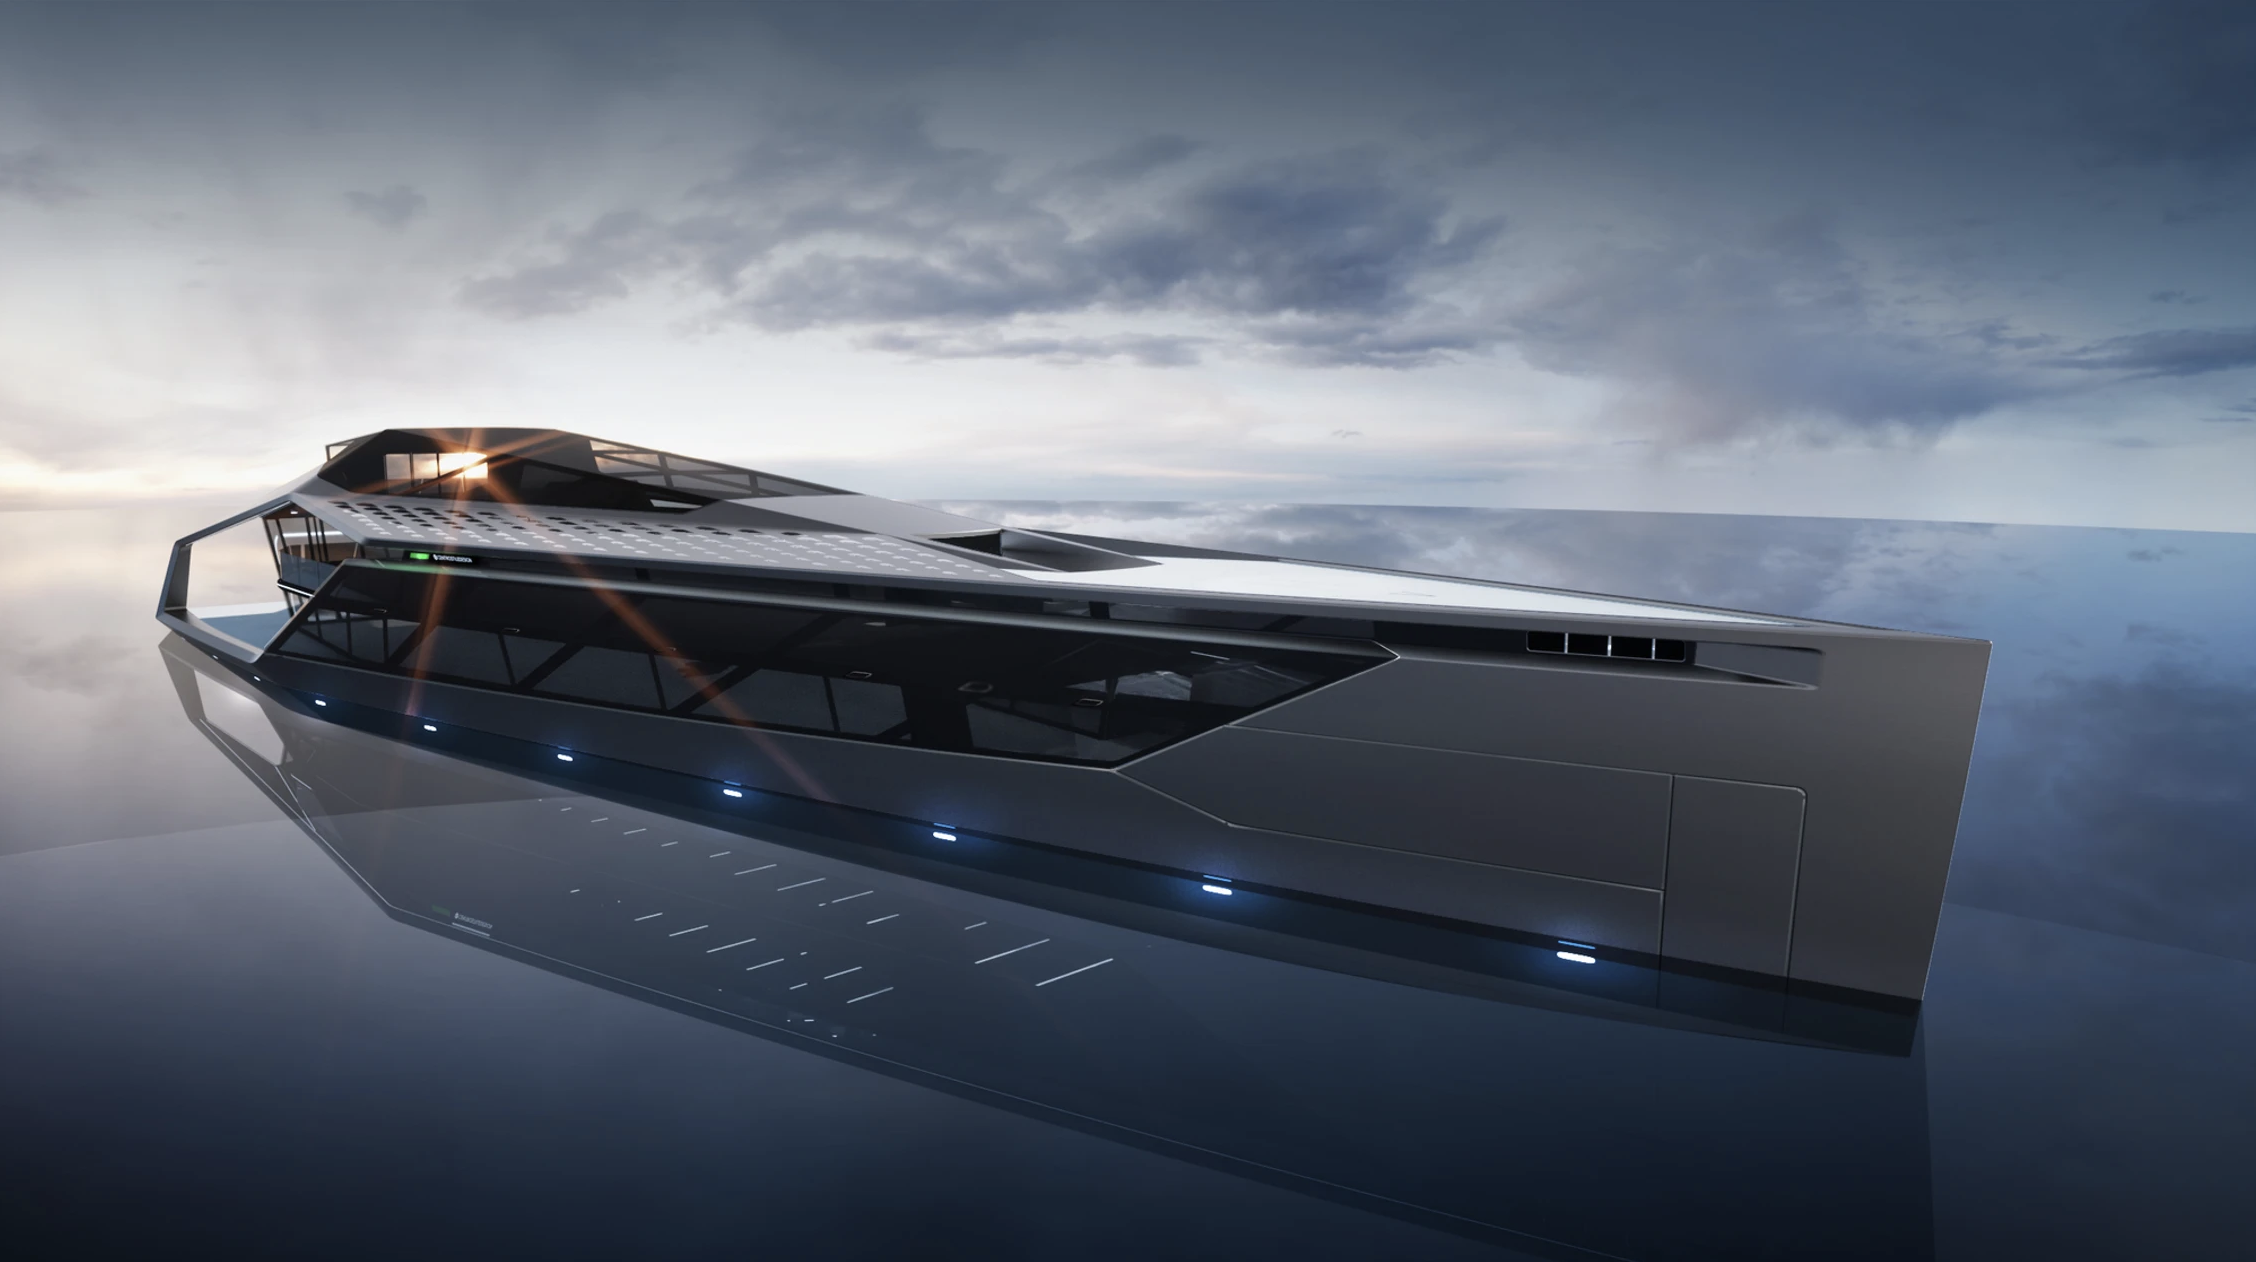 The Futuristic 230-Foot Superyacht Concept - A Giant Of The Oceans